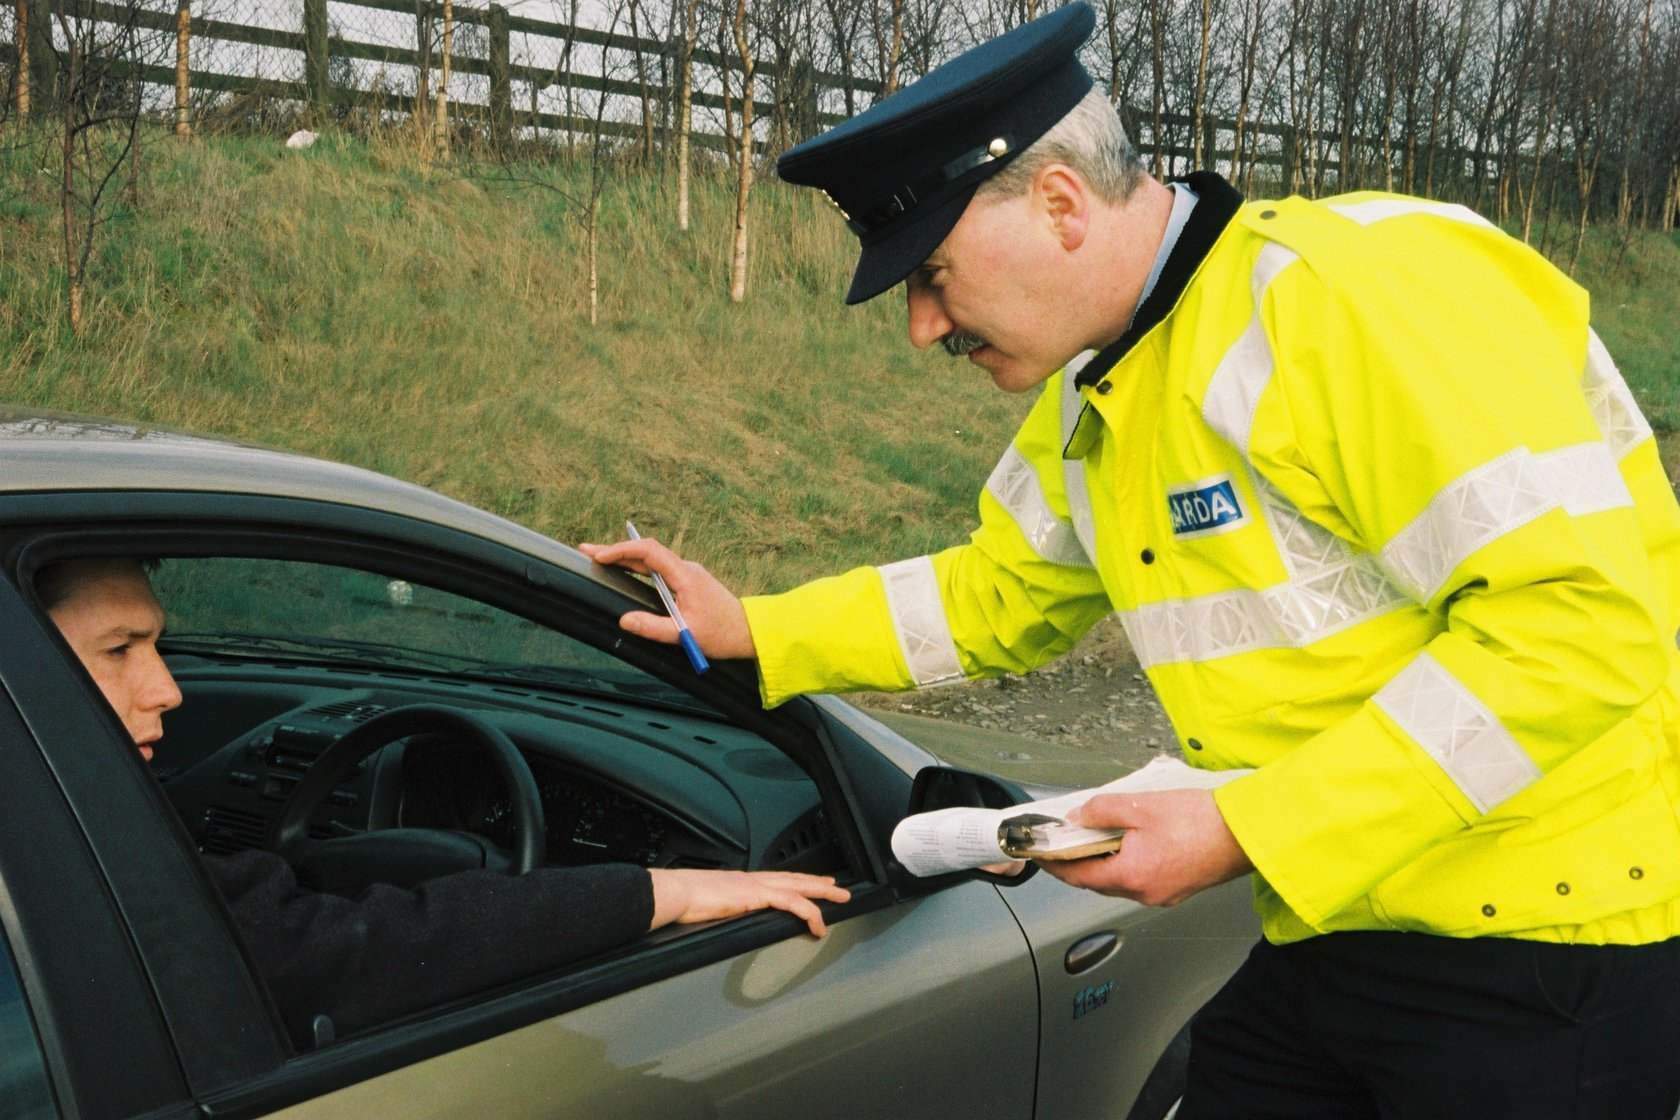 "The new drink-driving legislation has instilled fear into local communities particularly with the increased use of checkpoints during the so-called ‘morning after’."